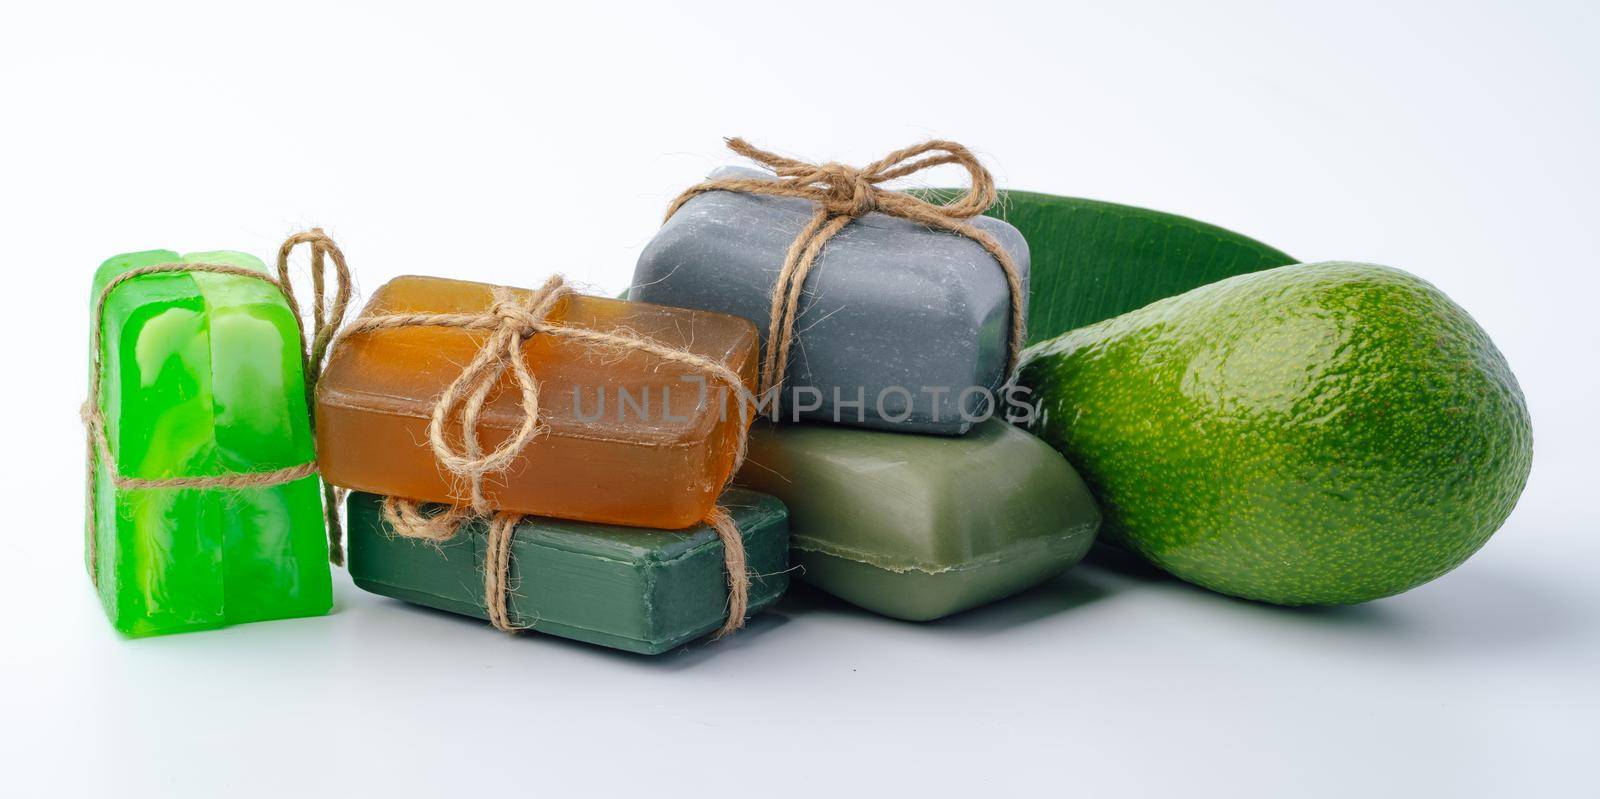 Soap bar with avocado on white background by Fabrikasimf